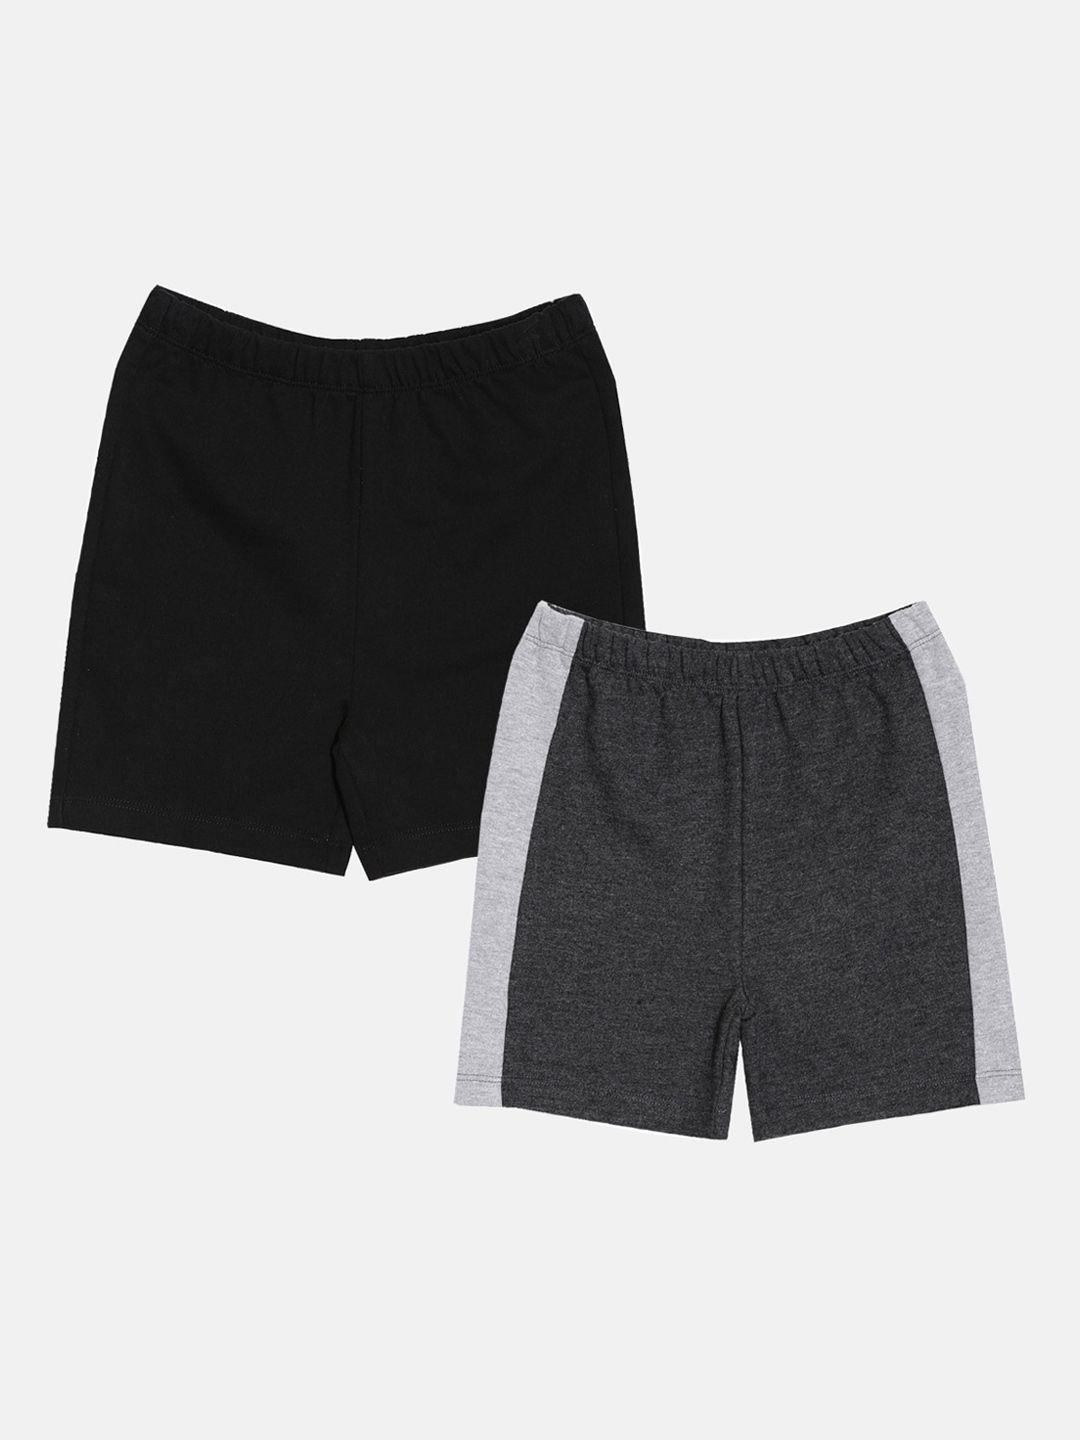 aomi pack of 2 boys black & charcoal solid cotton shorts